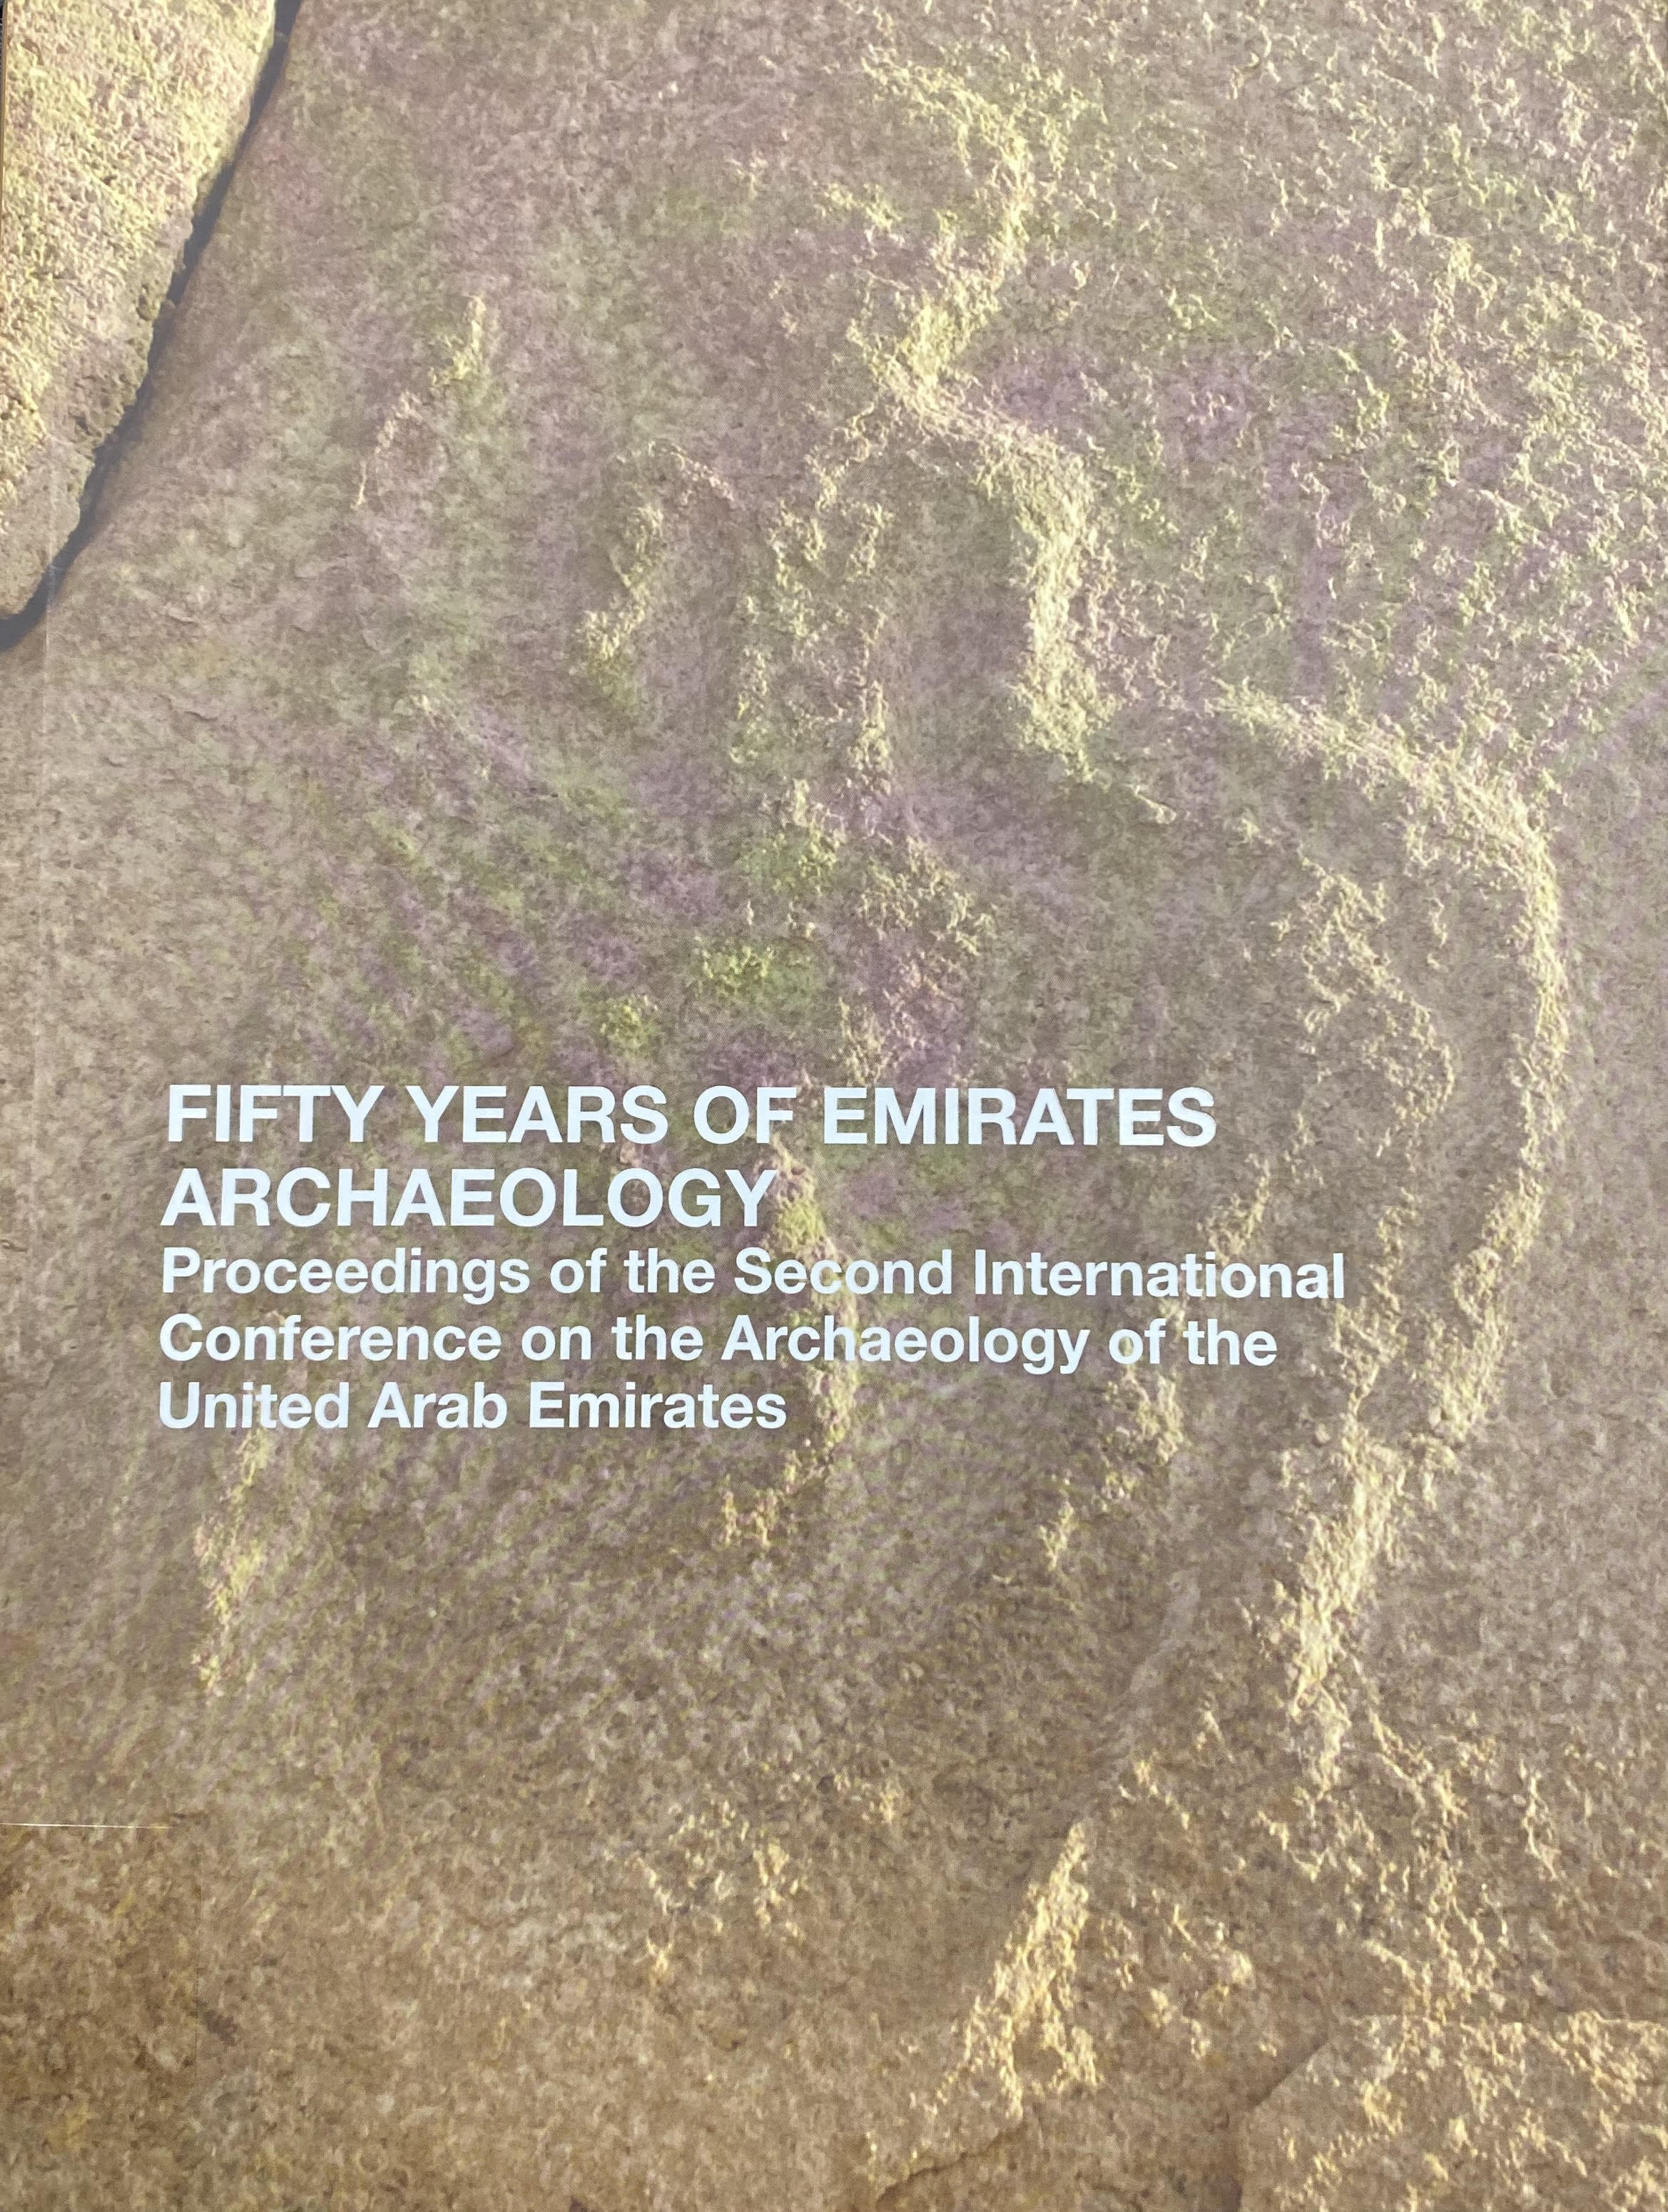 FIFTY YEARS OF EMIRATES ARCHAEOLOGY